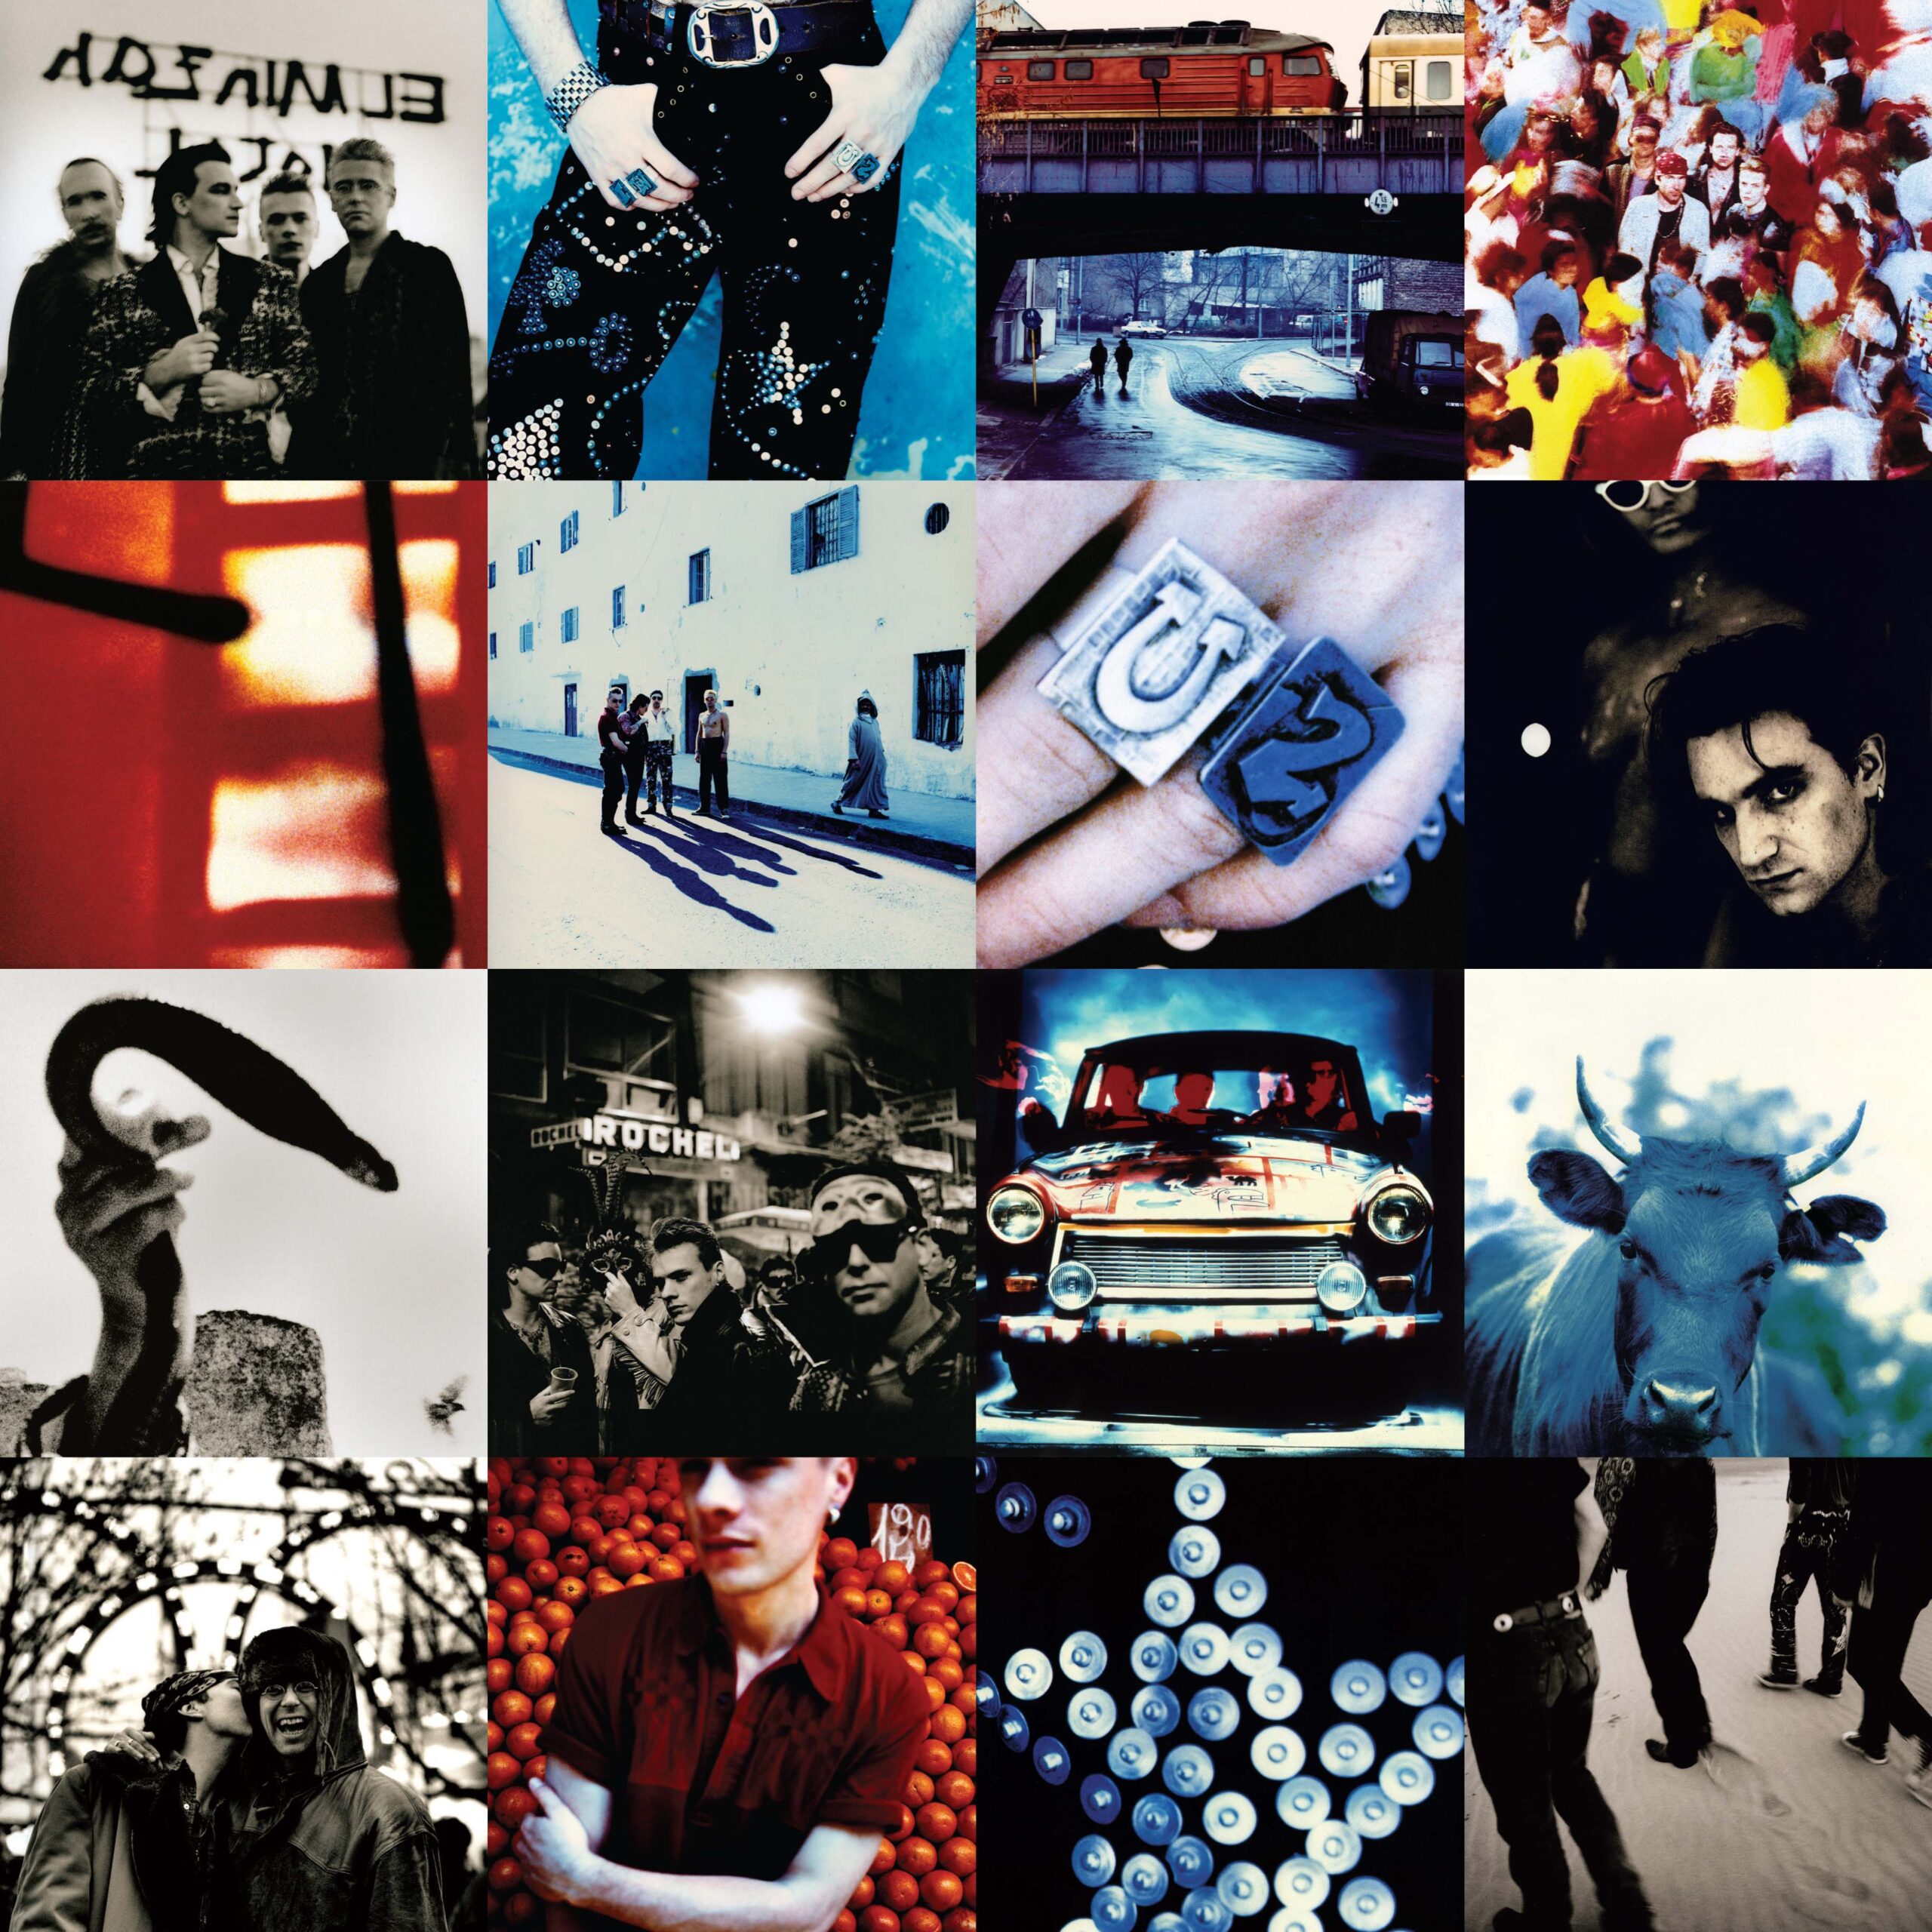 U2 Album Cover by U2, Island Records, and Universal Music Group for use by 360 Magazine